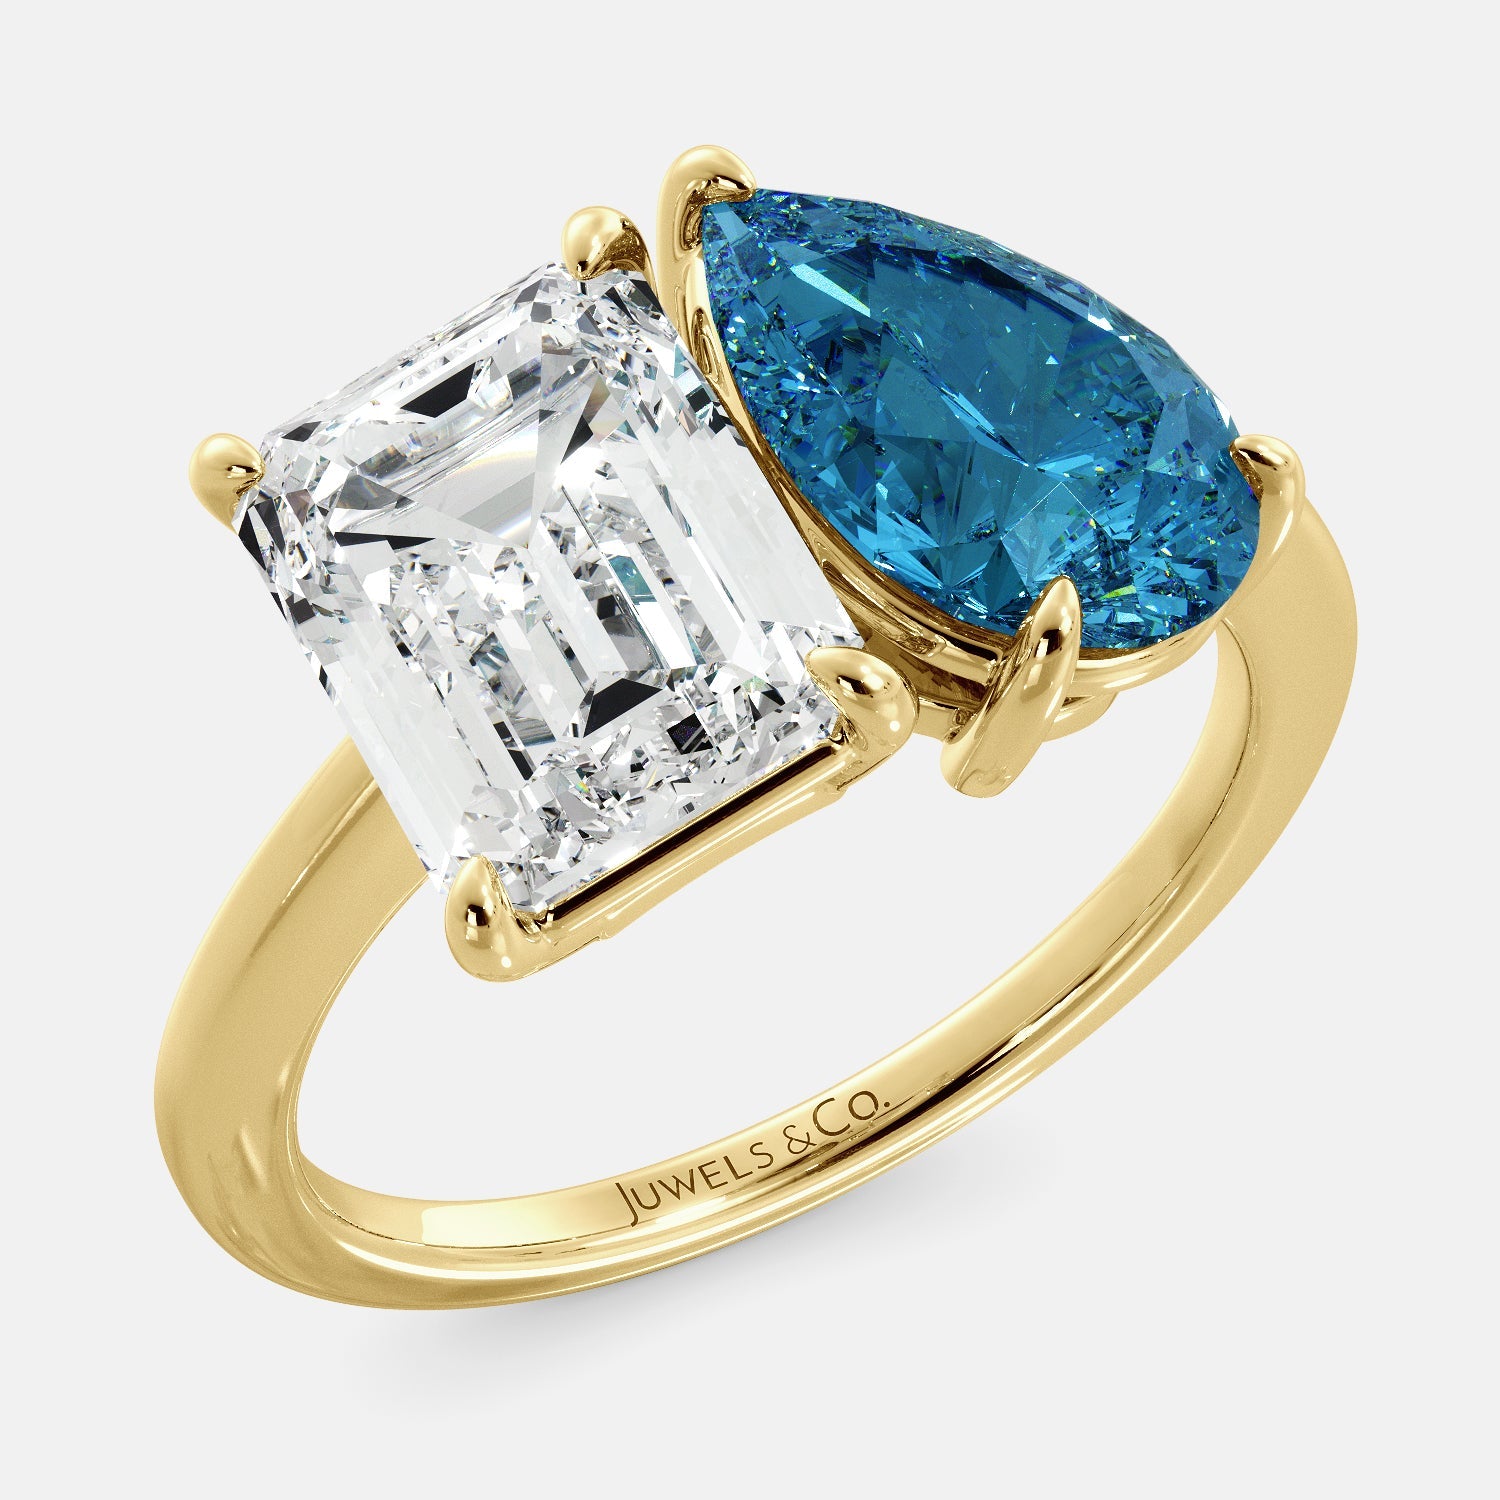  A toi et moi ring with a white topaz in an emerald cut shape and a london blue topaz pear shape gem. The ring is made of 14k yellow gold and is set on a dainty band. The white topaz is set in the center of the ring and is surrounded by the london blue topaz. The ring is sparkling in the light and is a beautiful and meaningful piece of jewelry.